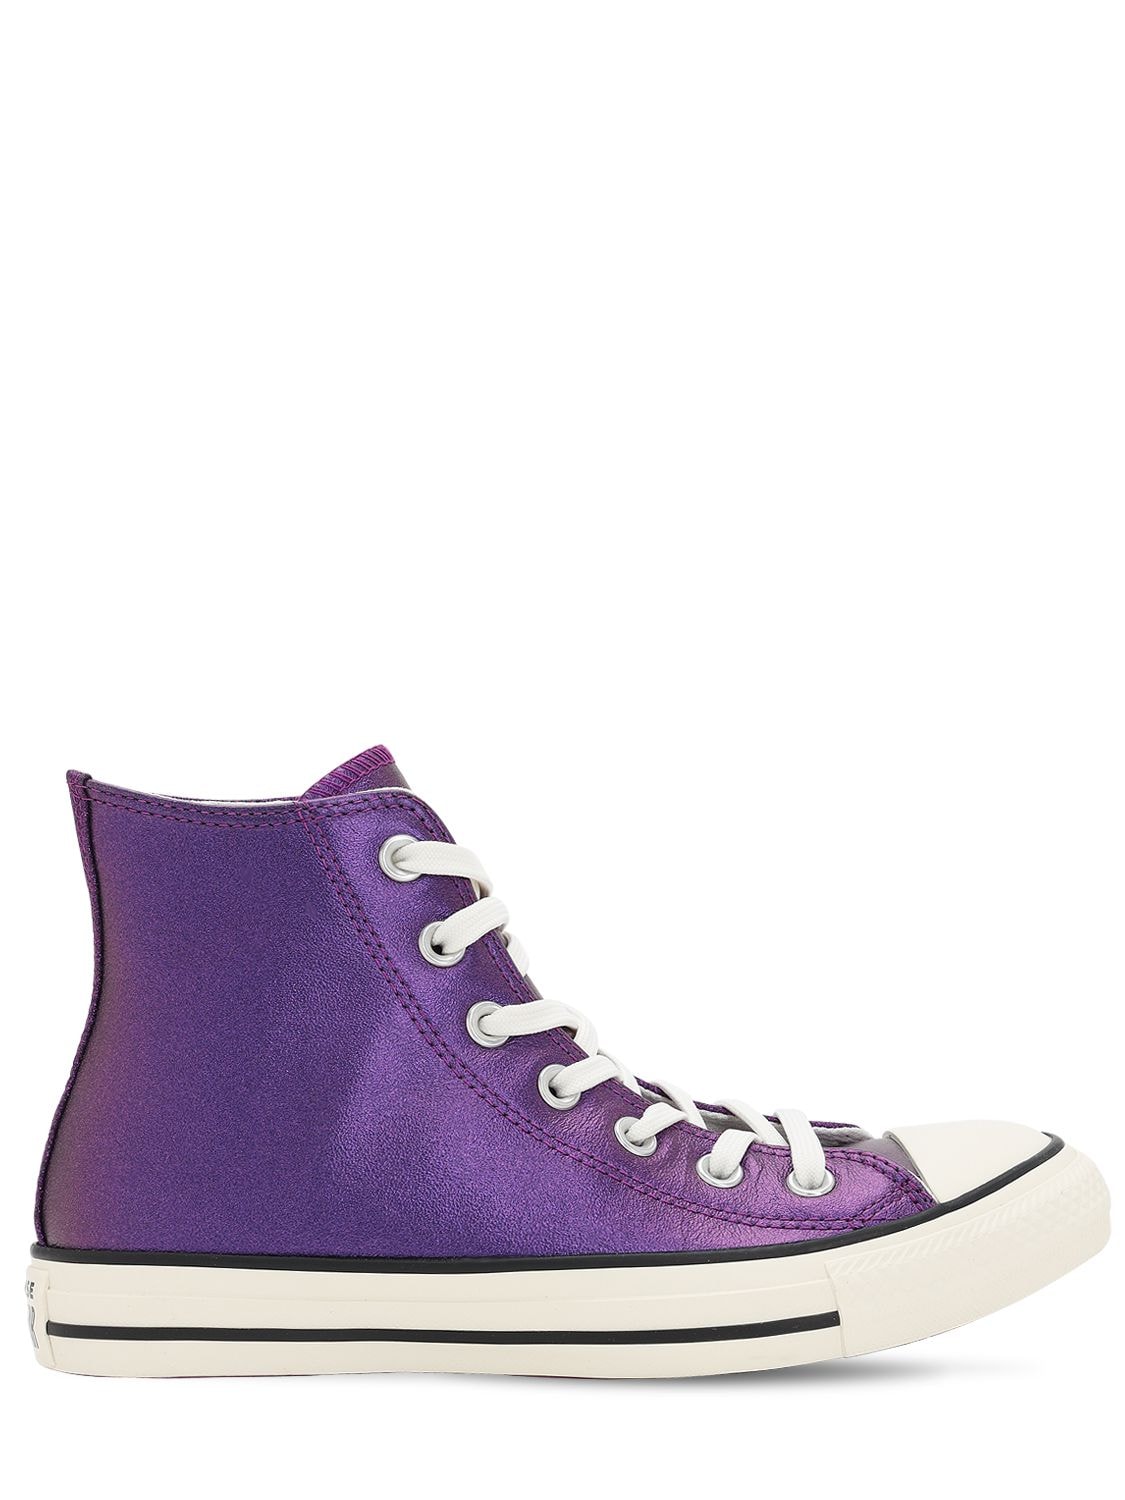 Converse Chuck Taylor All Star Hi Sneakers In Purple